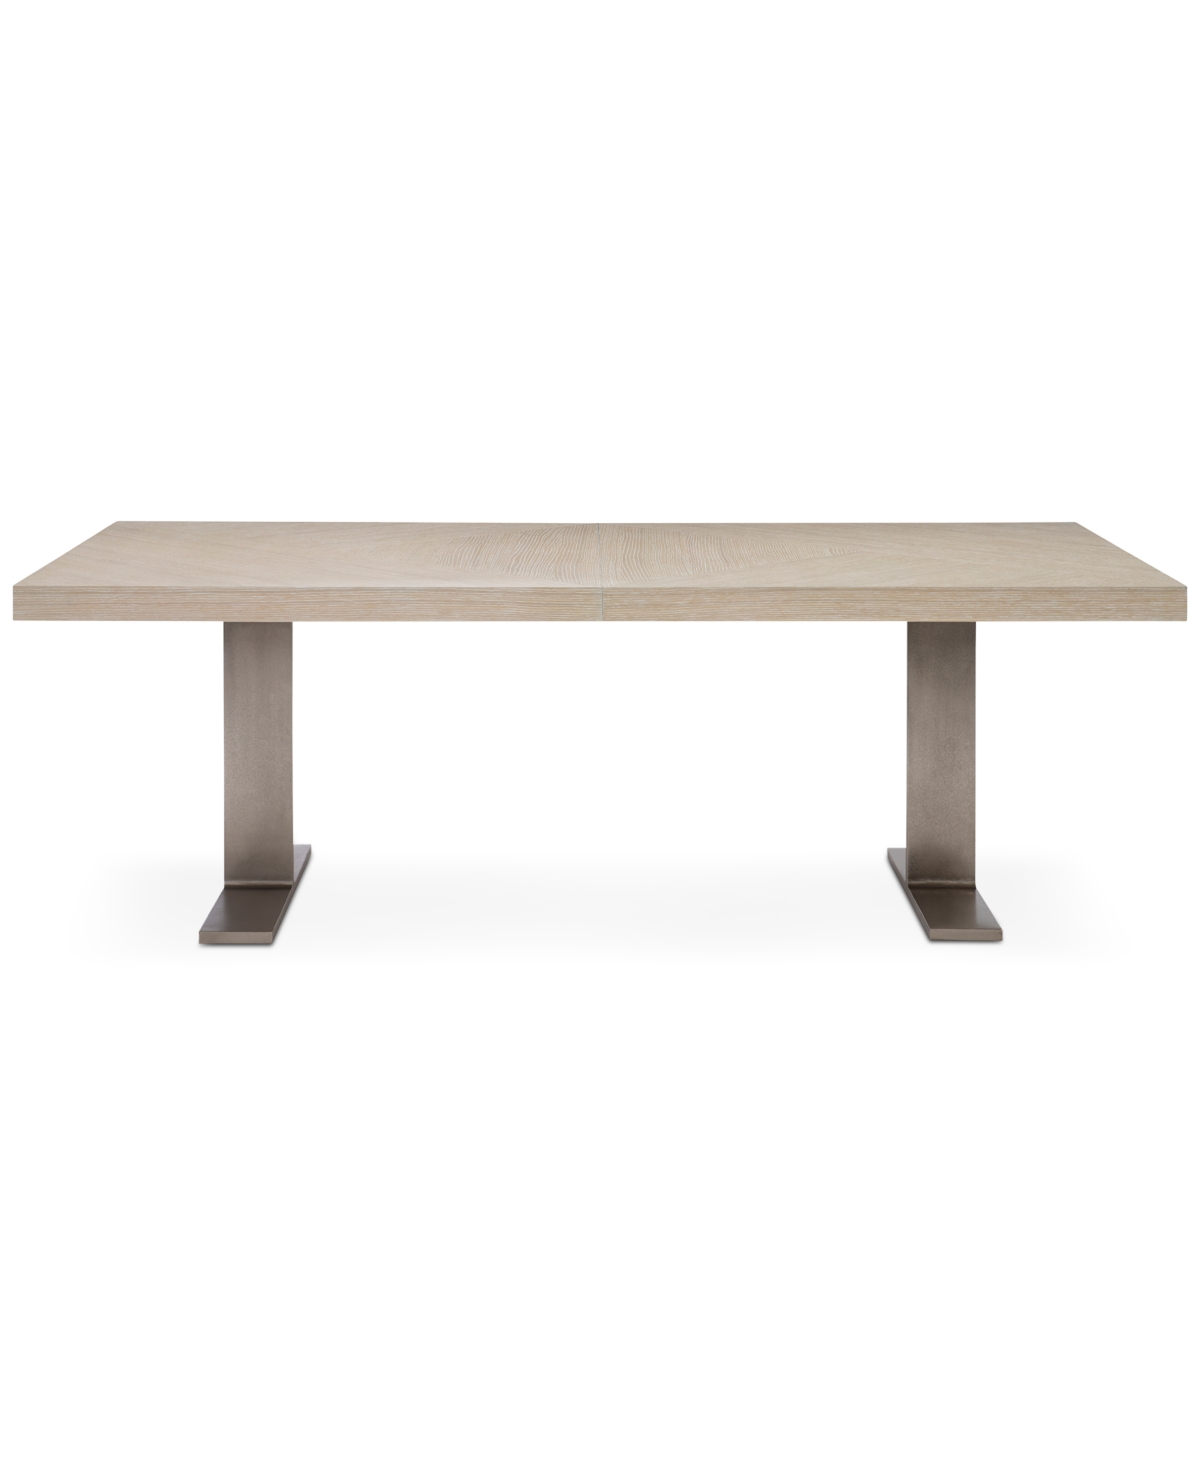 Bernhardt Solaria Rectangle Dining Table In Light Wood